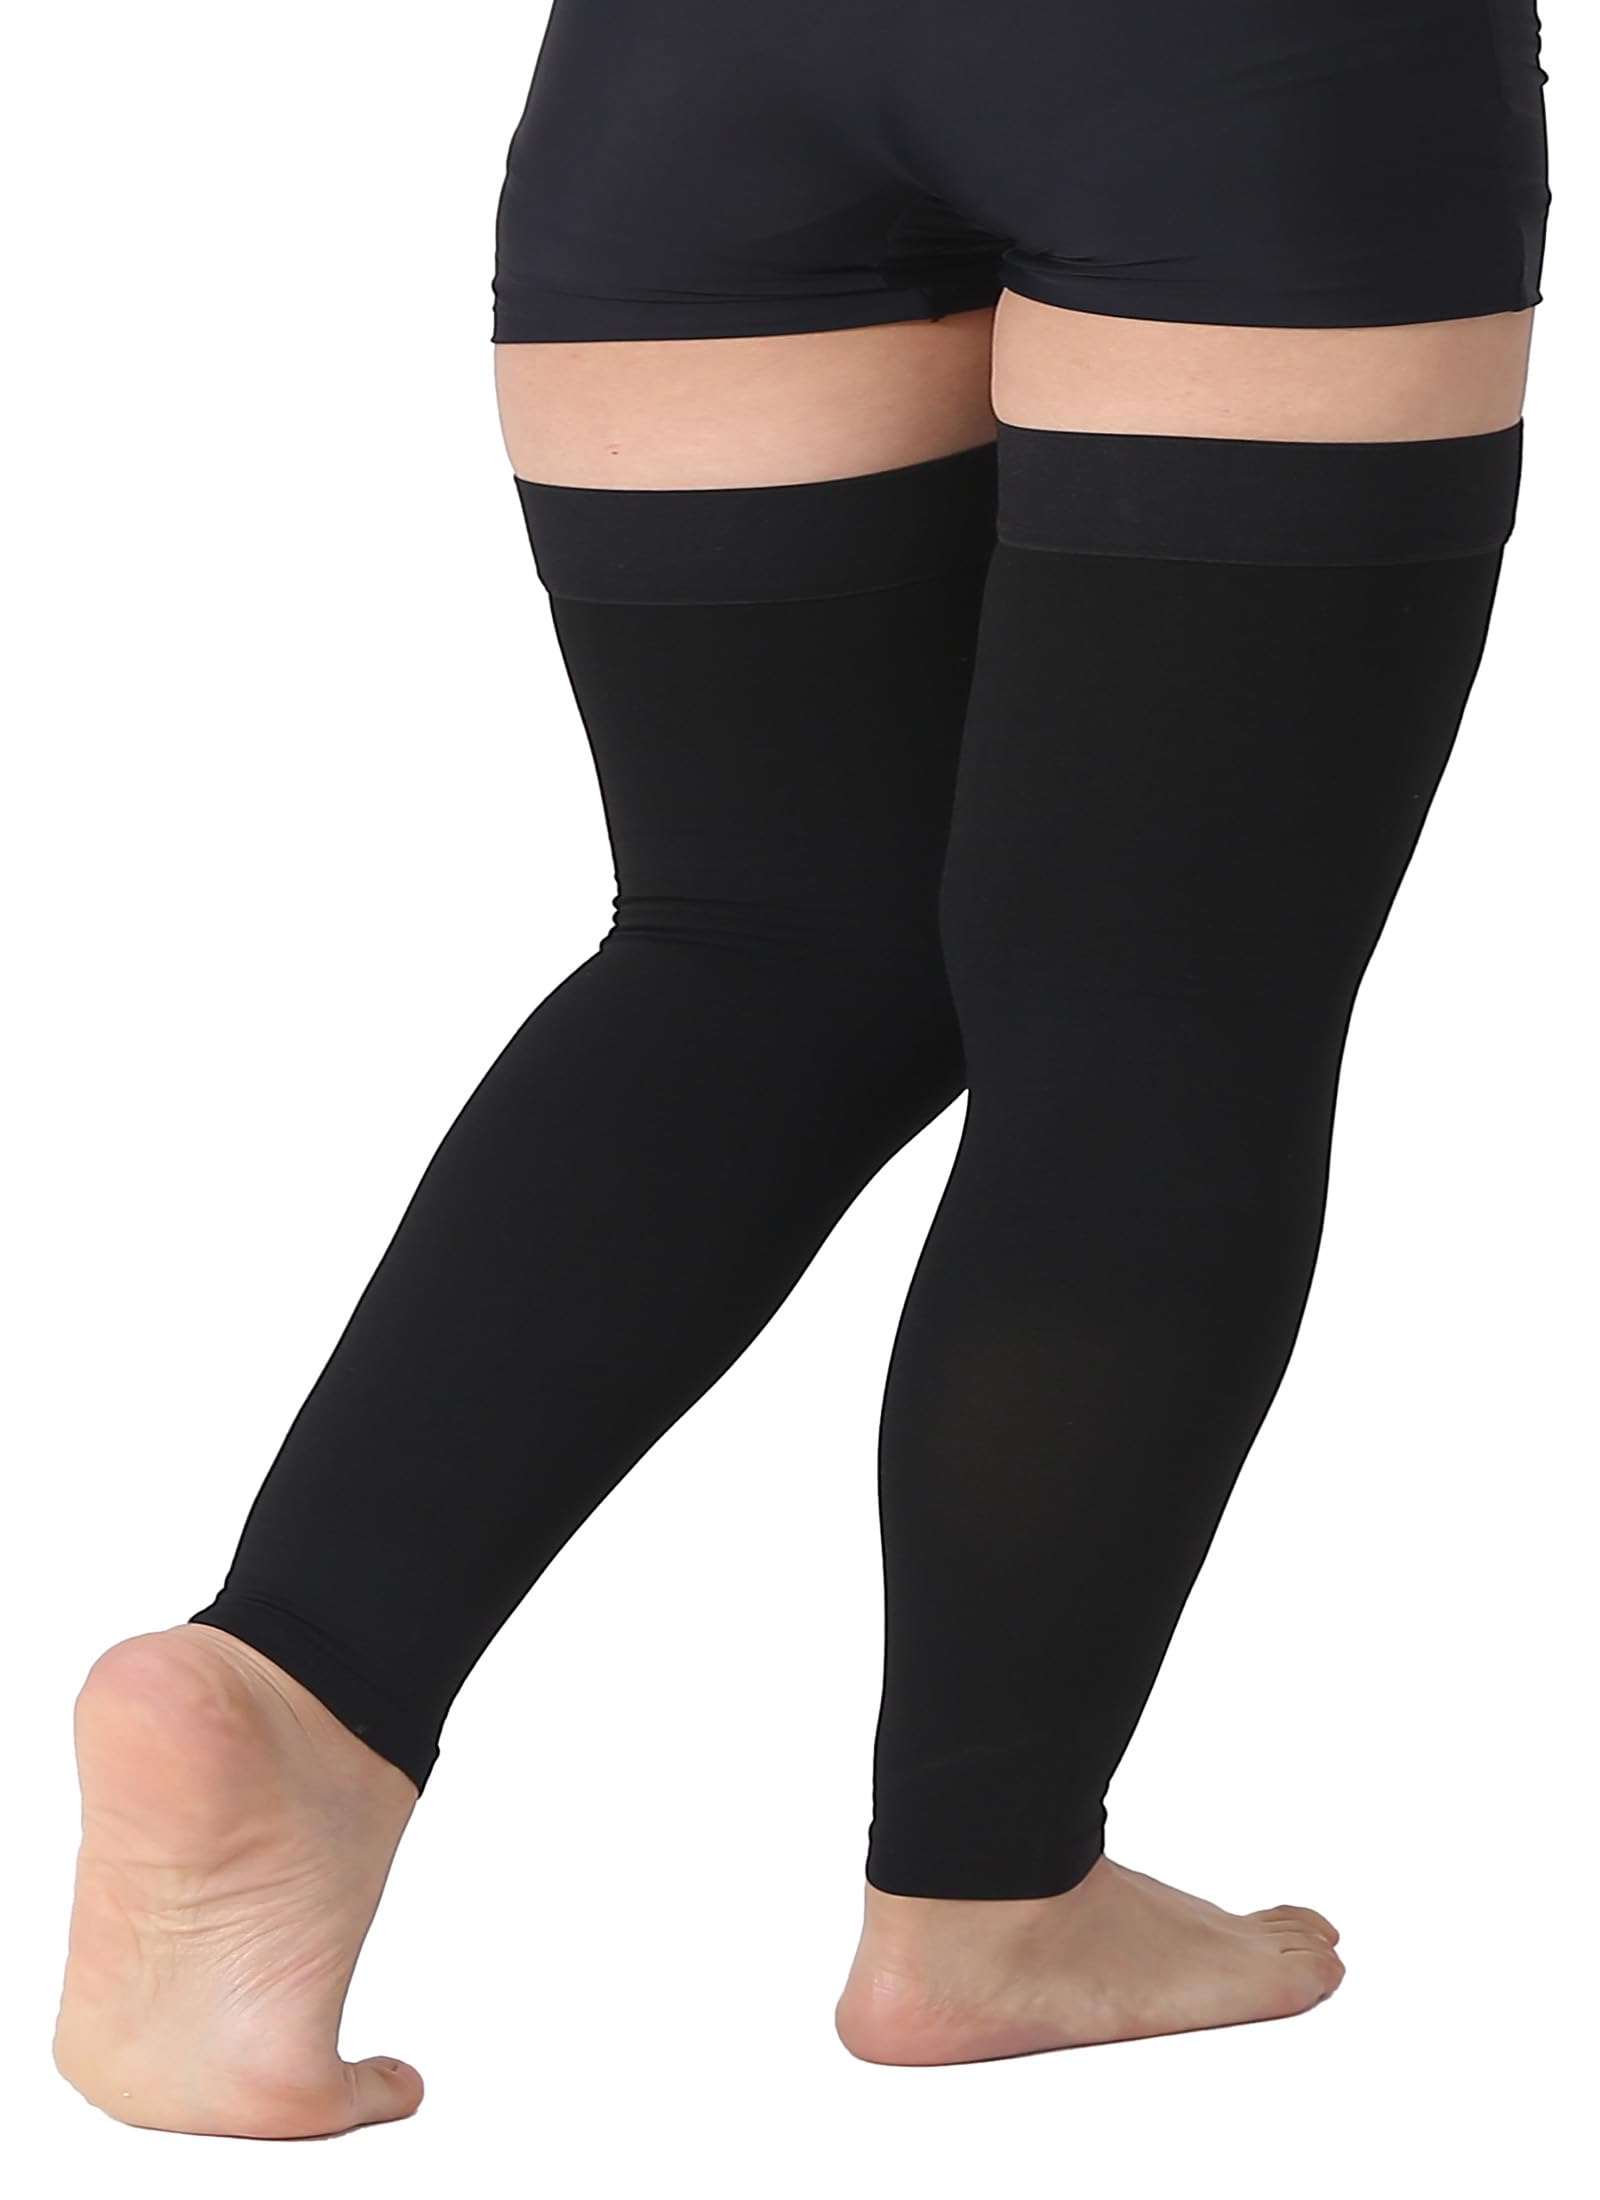 TOFLY Thigh High Compression Stockings Opaque 1 Pair Firm Support 20-30  mmHg Gradient Compression with Silicone Band Footless Compression Sleeves  Treatment Swelling Varicose Veins Edema. XL 15-20mmhg Black